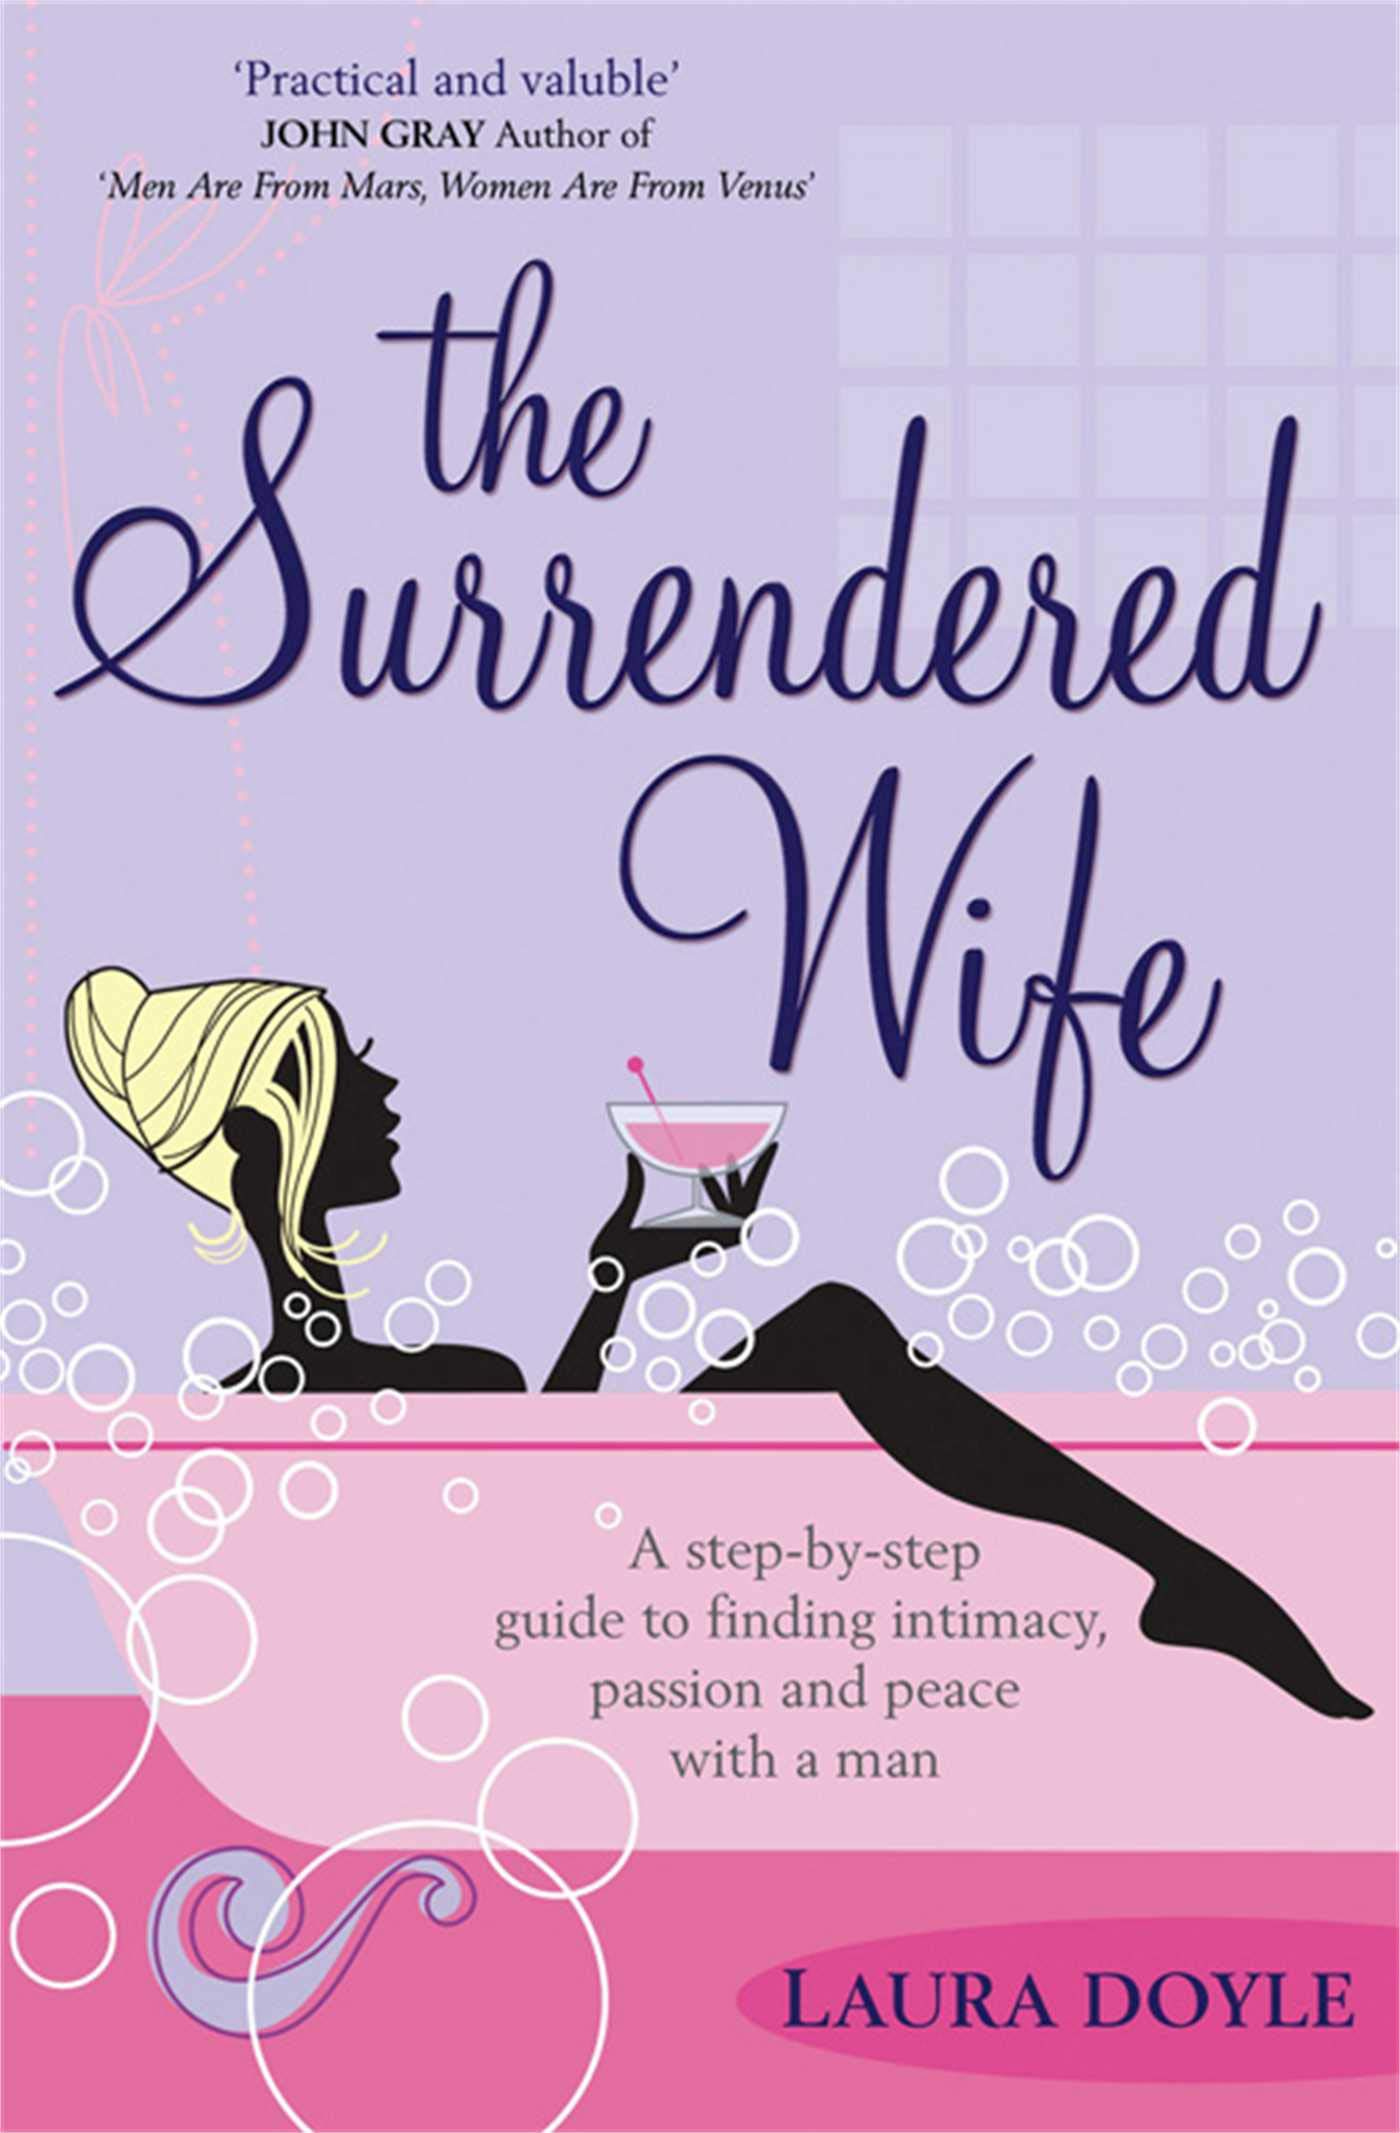 The Surrendered Wife: A Practical Guide To Finding Intimacy, Passion And  Peace With Your Man: Amazon.co.uk: Doyle, Laura: 9781416511649: Books